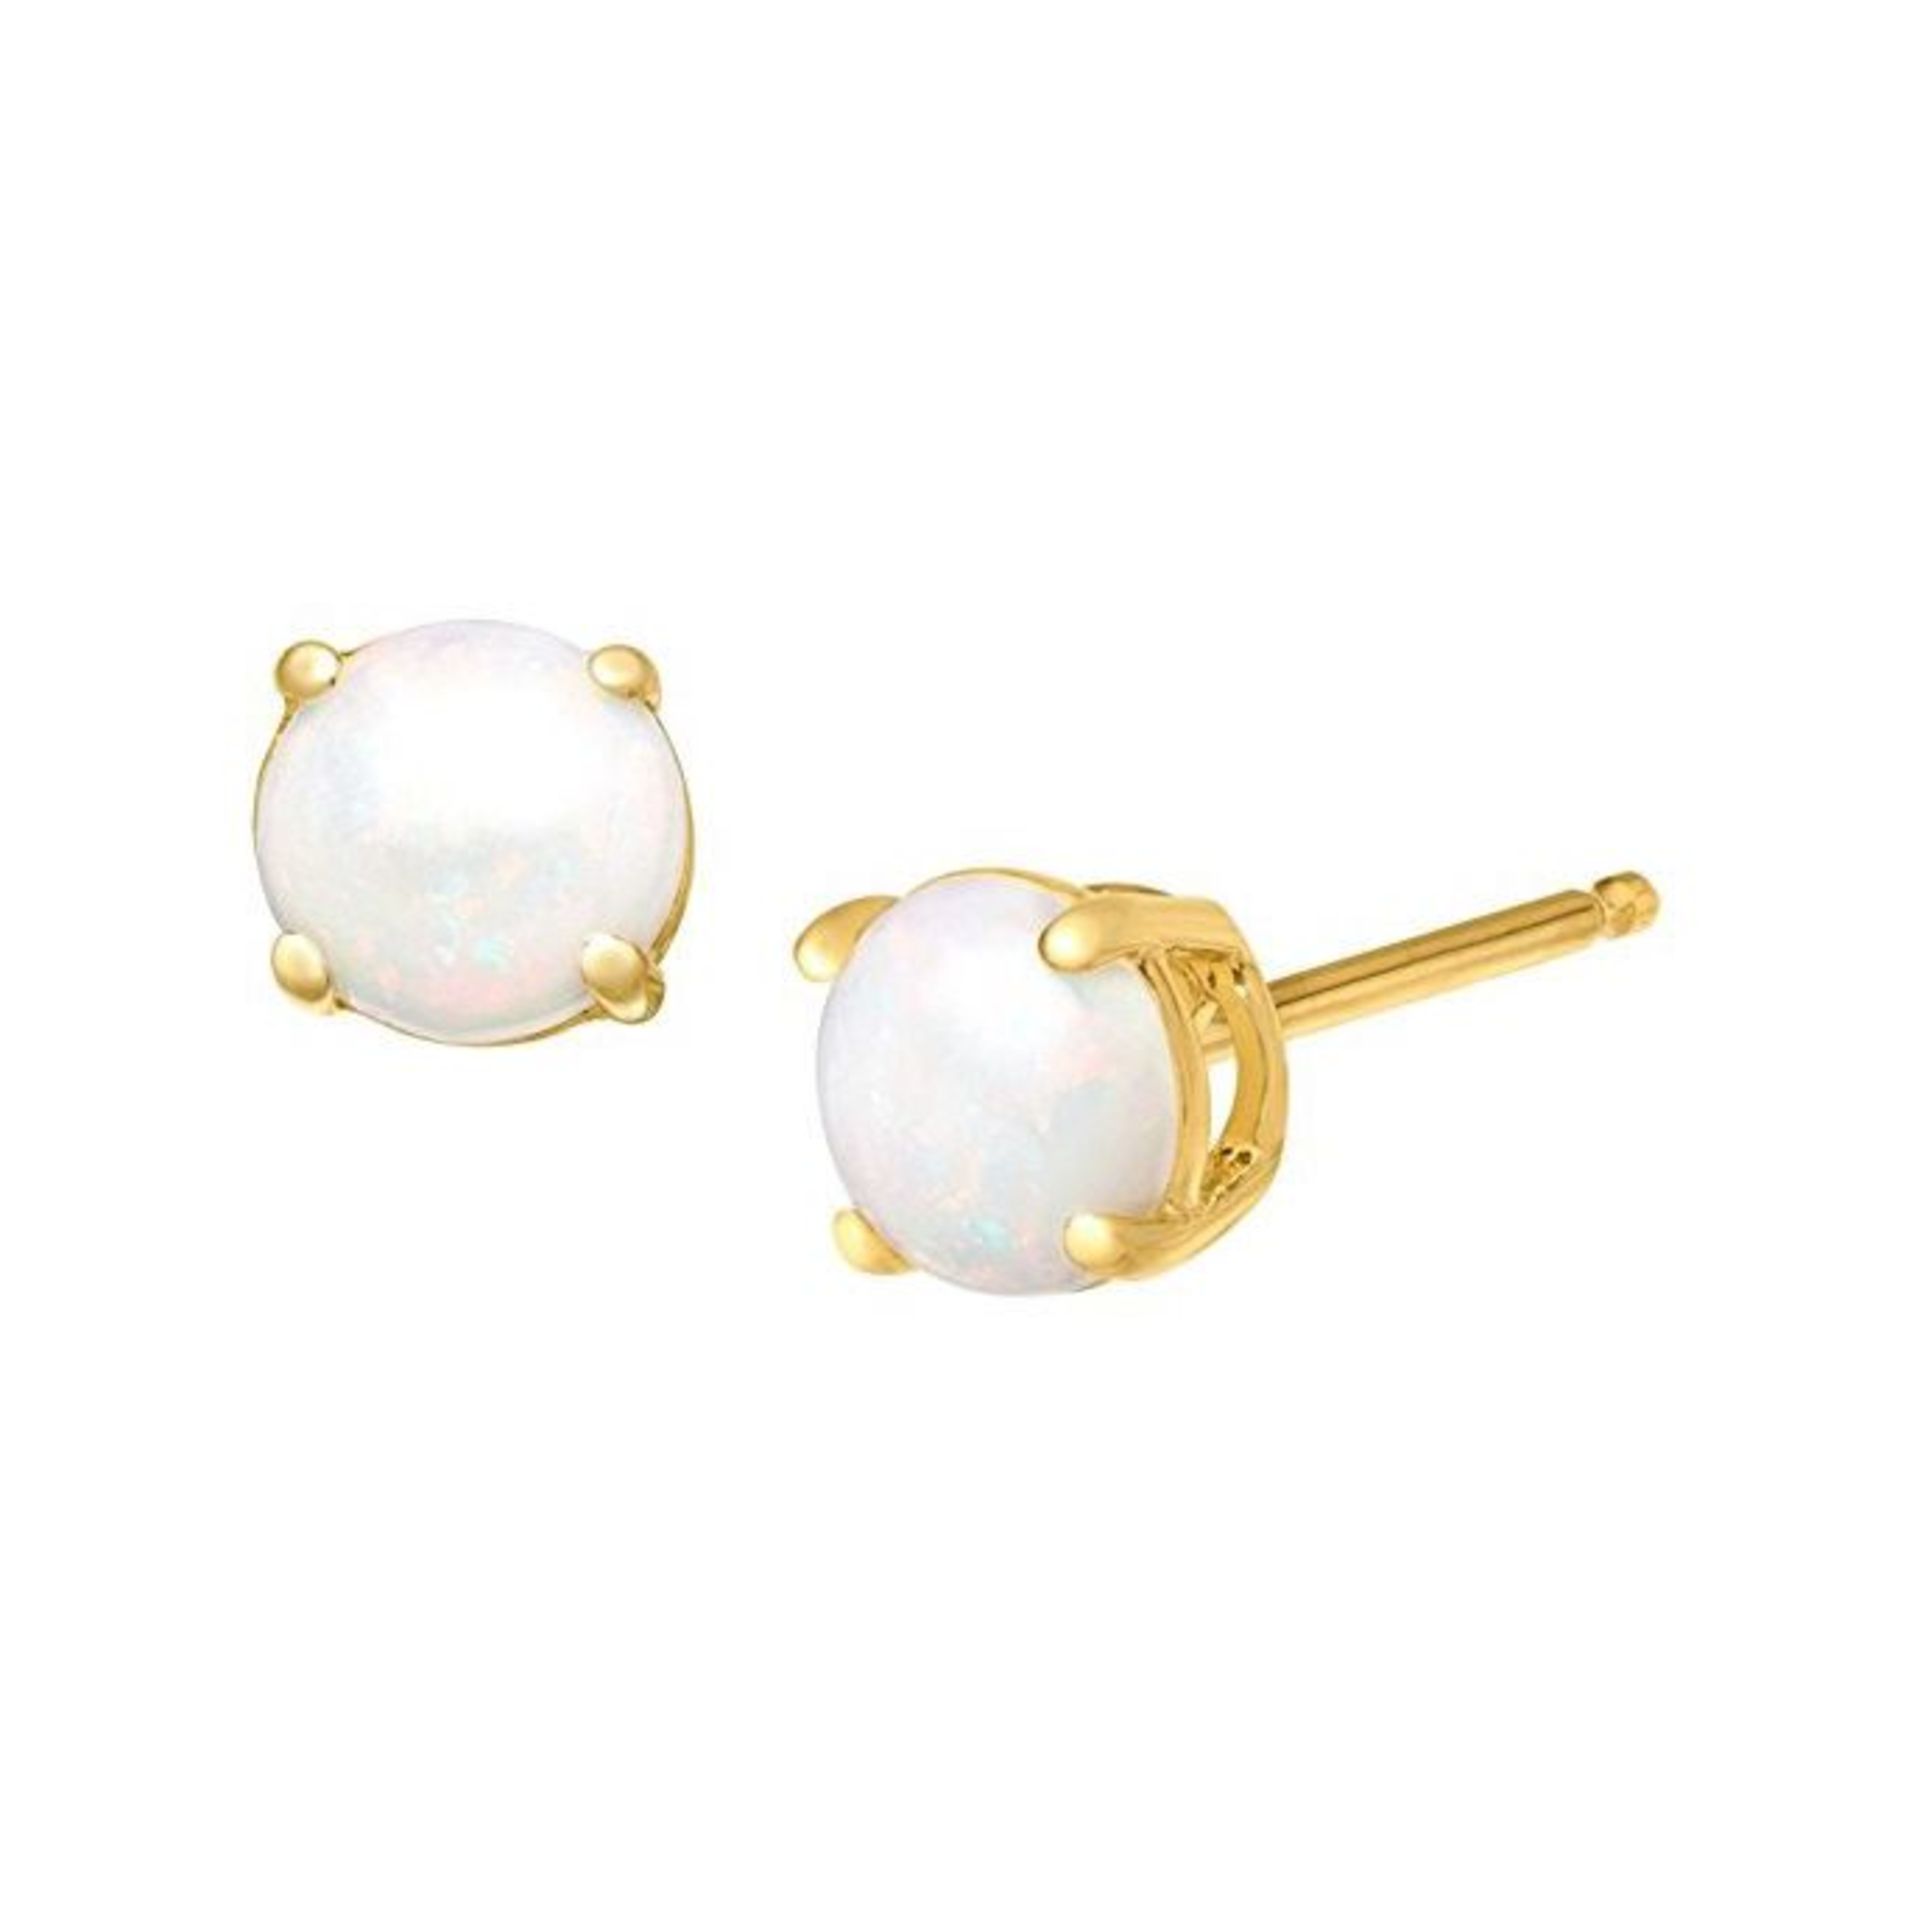 Opal Earrings in 9ct Yellow Gold, Metal 9ct Yellow Gold, Weight 0.8, RRP £124.99 (m-trans9yop)(Comes